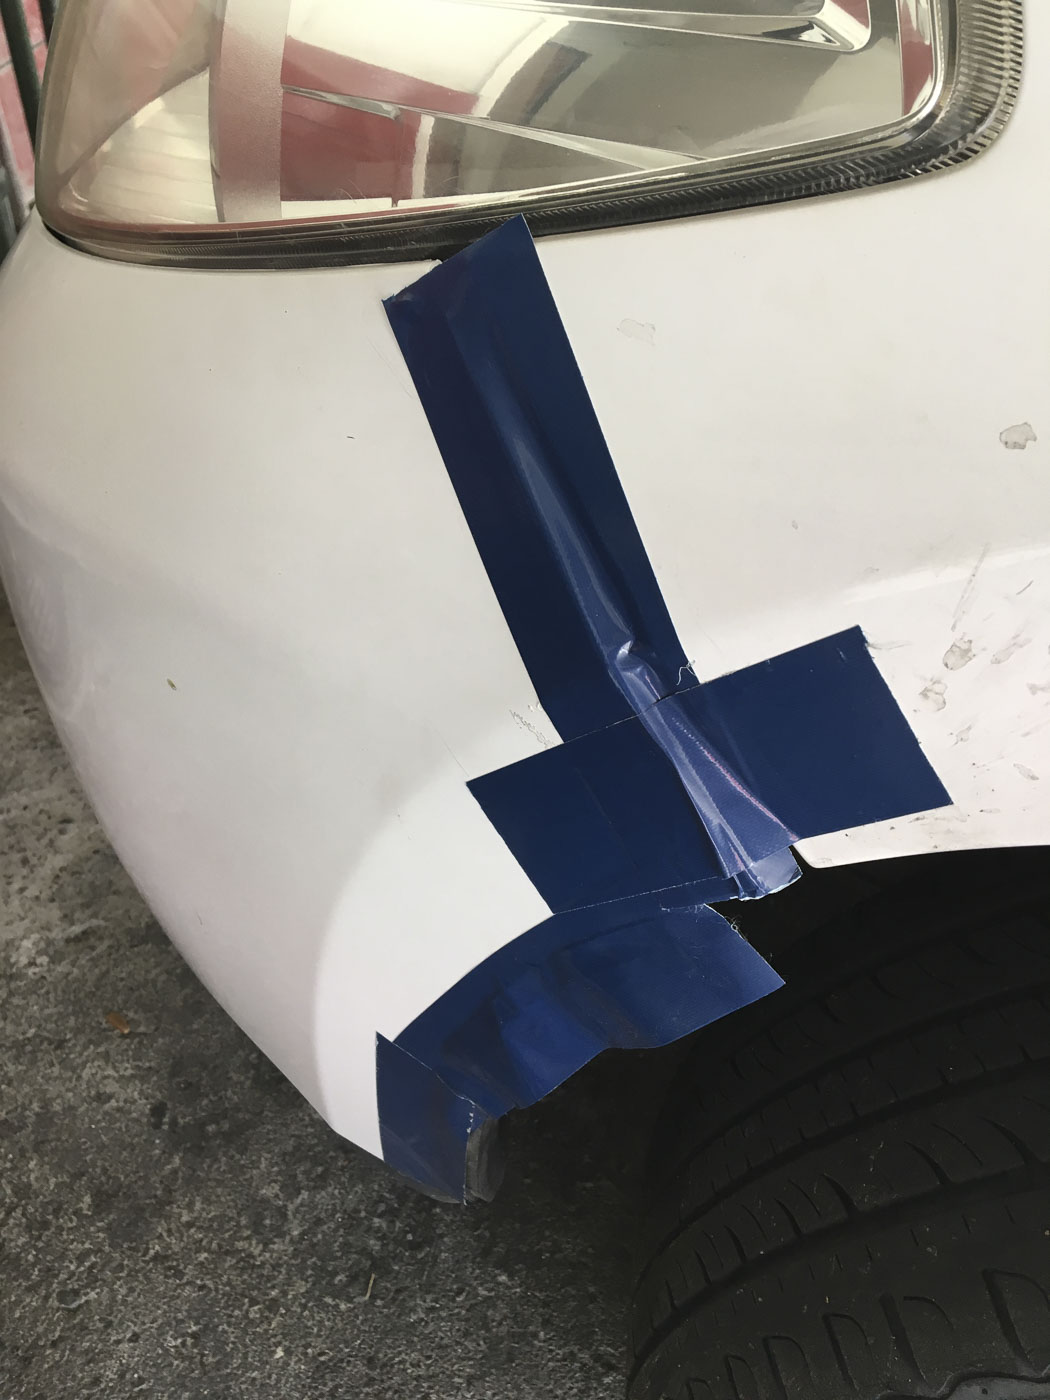 Duct tape ftw